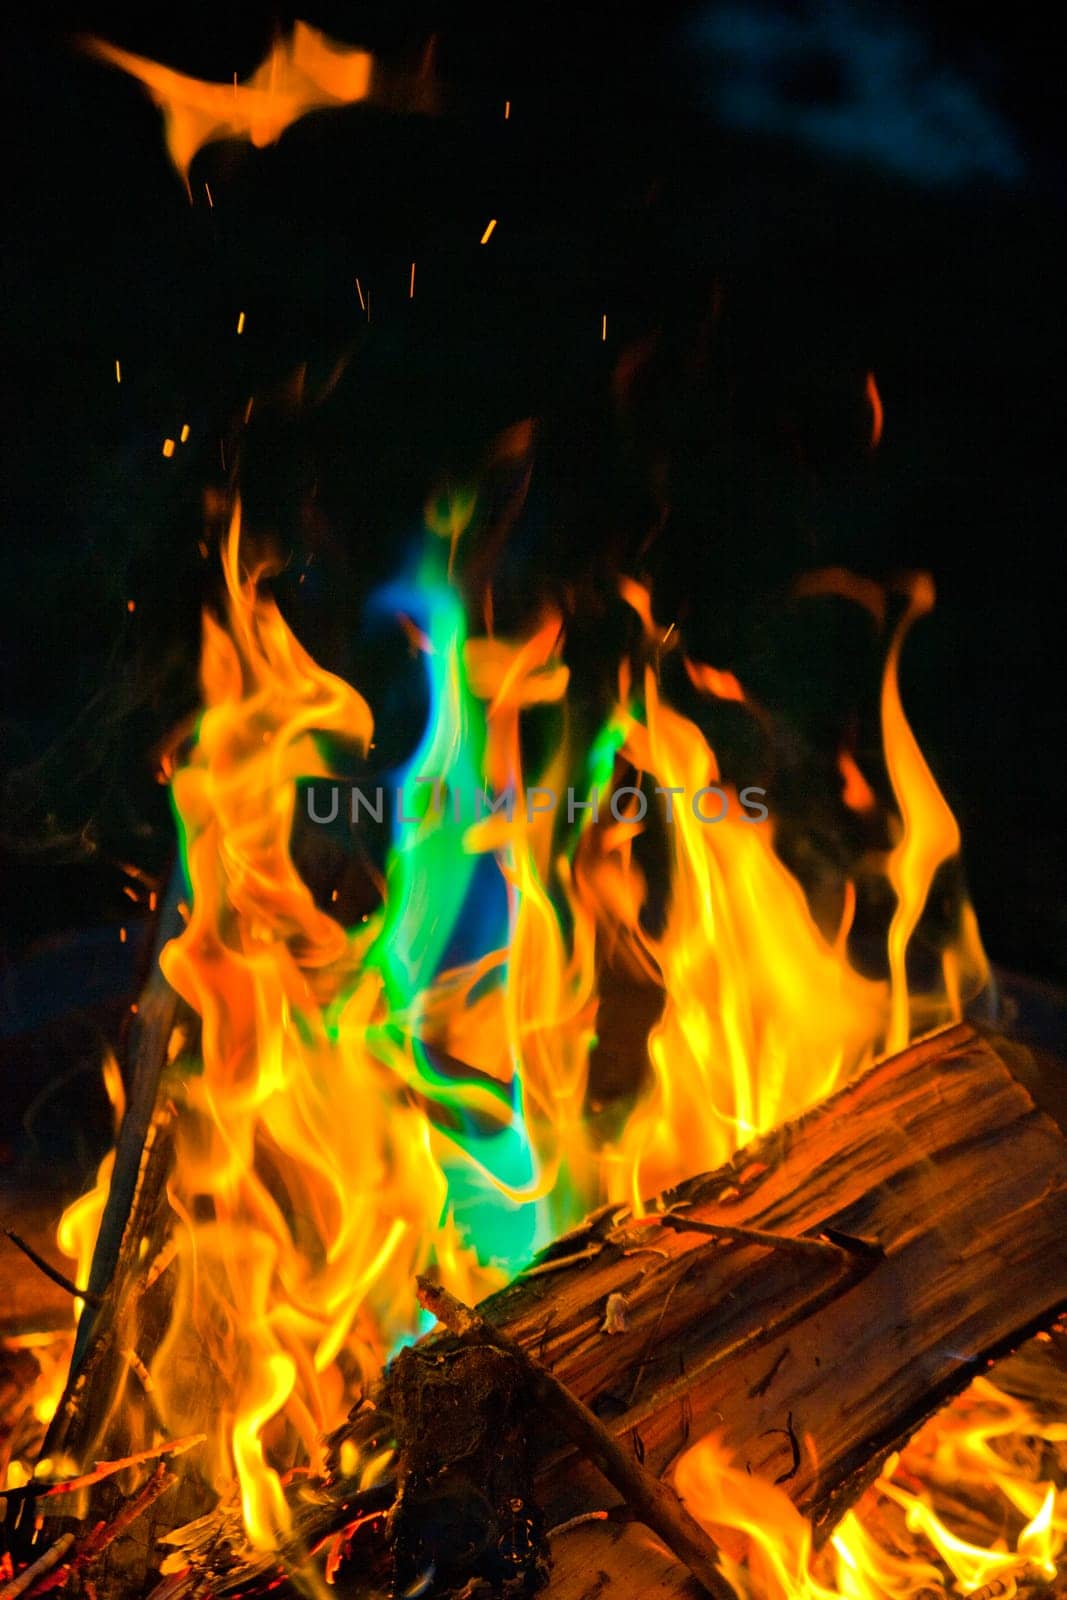 Dancing Flames: A mesmerizing wood fire in Fort Wayne, Indiana, showcases a vibrant spectrum of colors, including unusual patches of green and blue. The captivating display evokes warmth, energy, and the allure of nature,